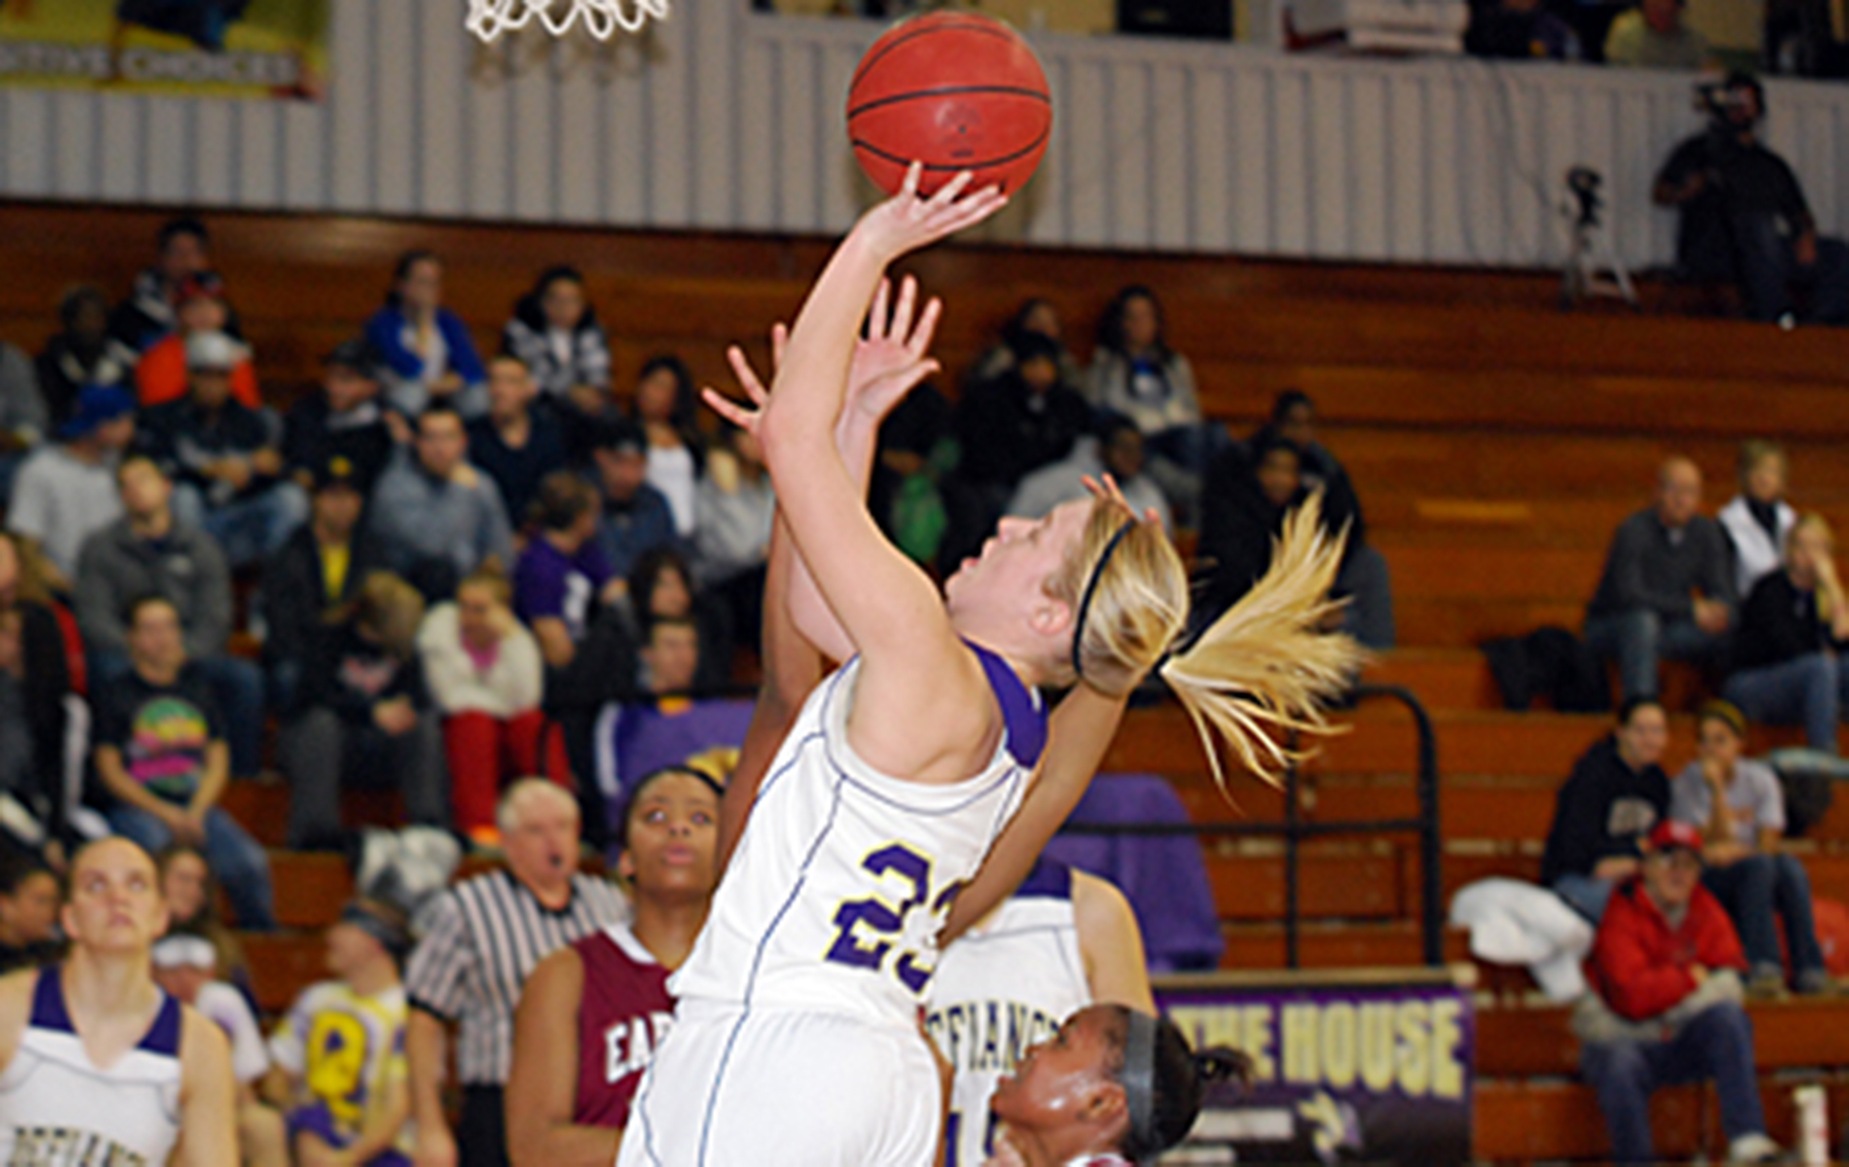 HCAC's Leading Defense Can't Stop the Jackets in 79-72 Victory